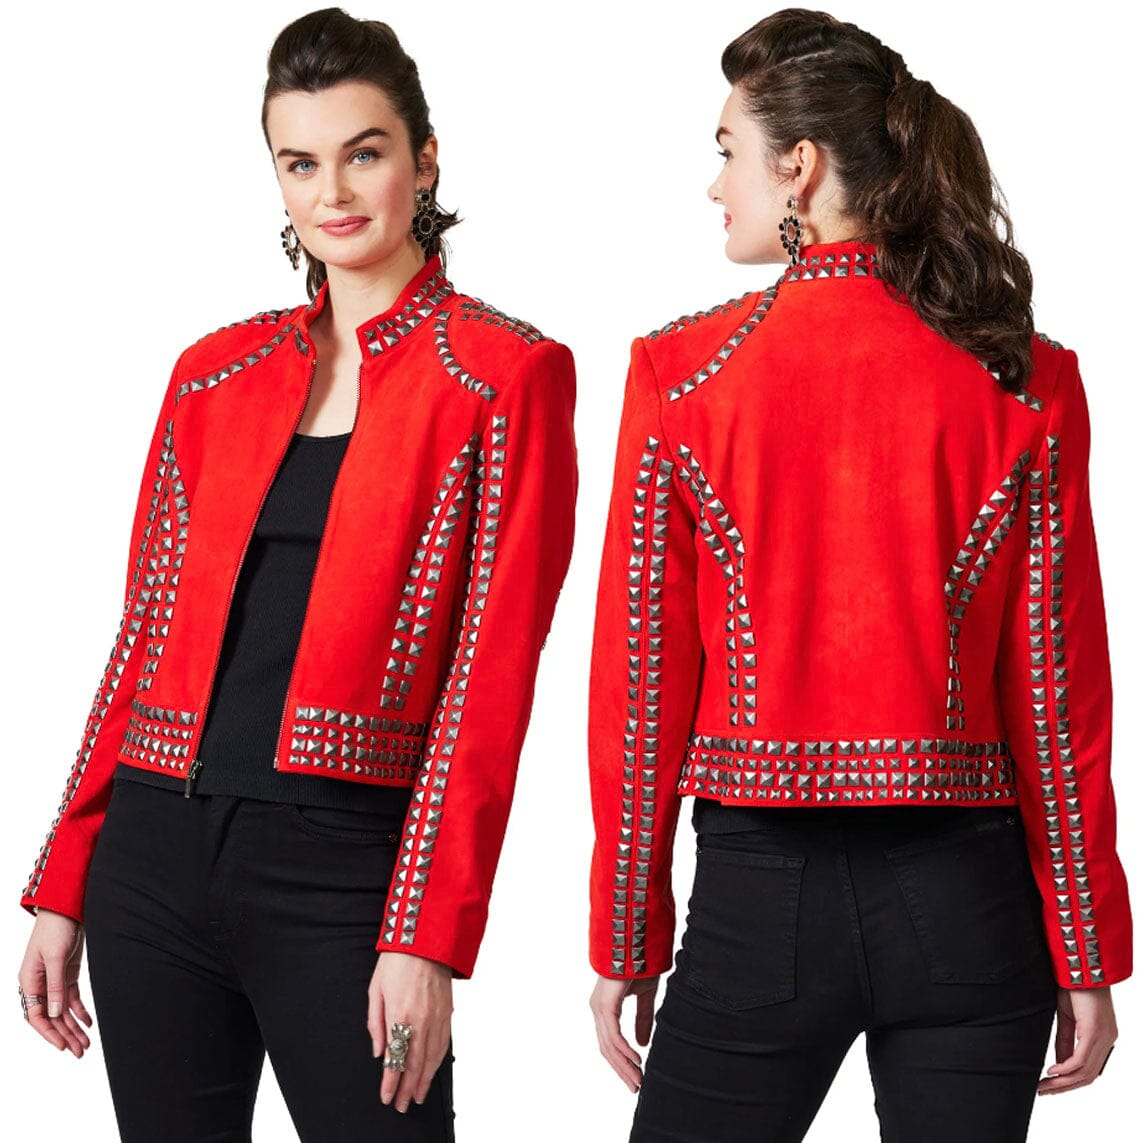 Renegade Jacket Red - Double D Ranch - JDD28